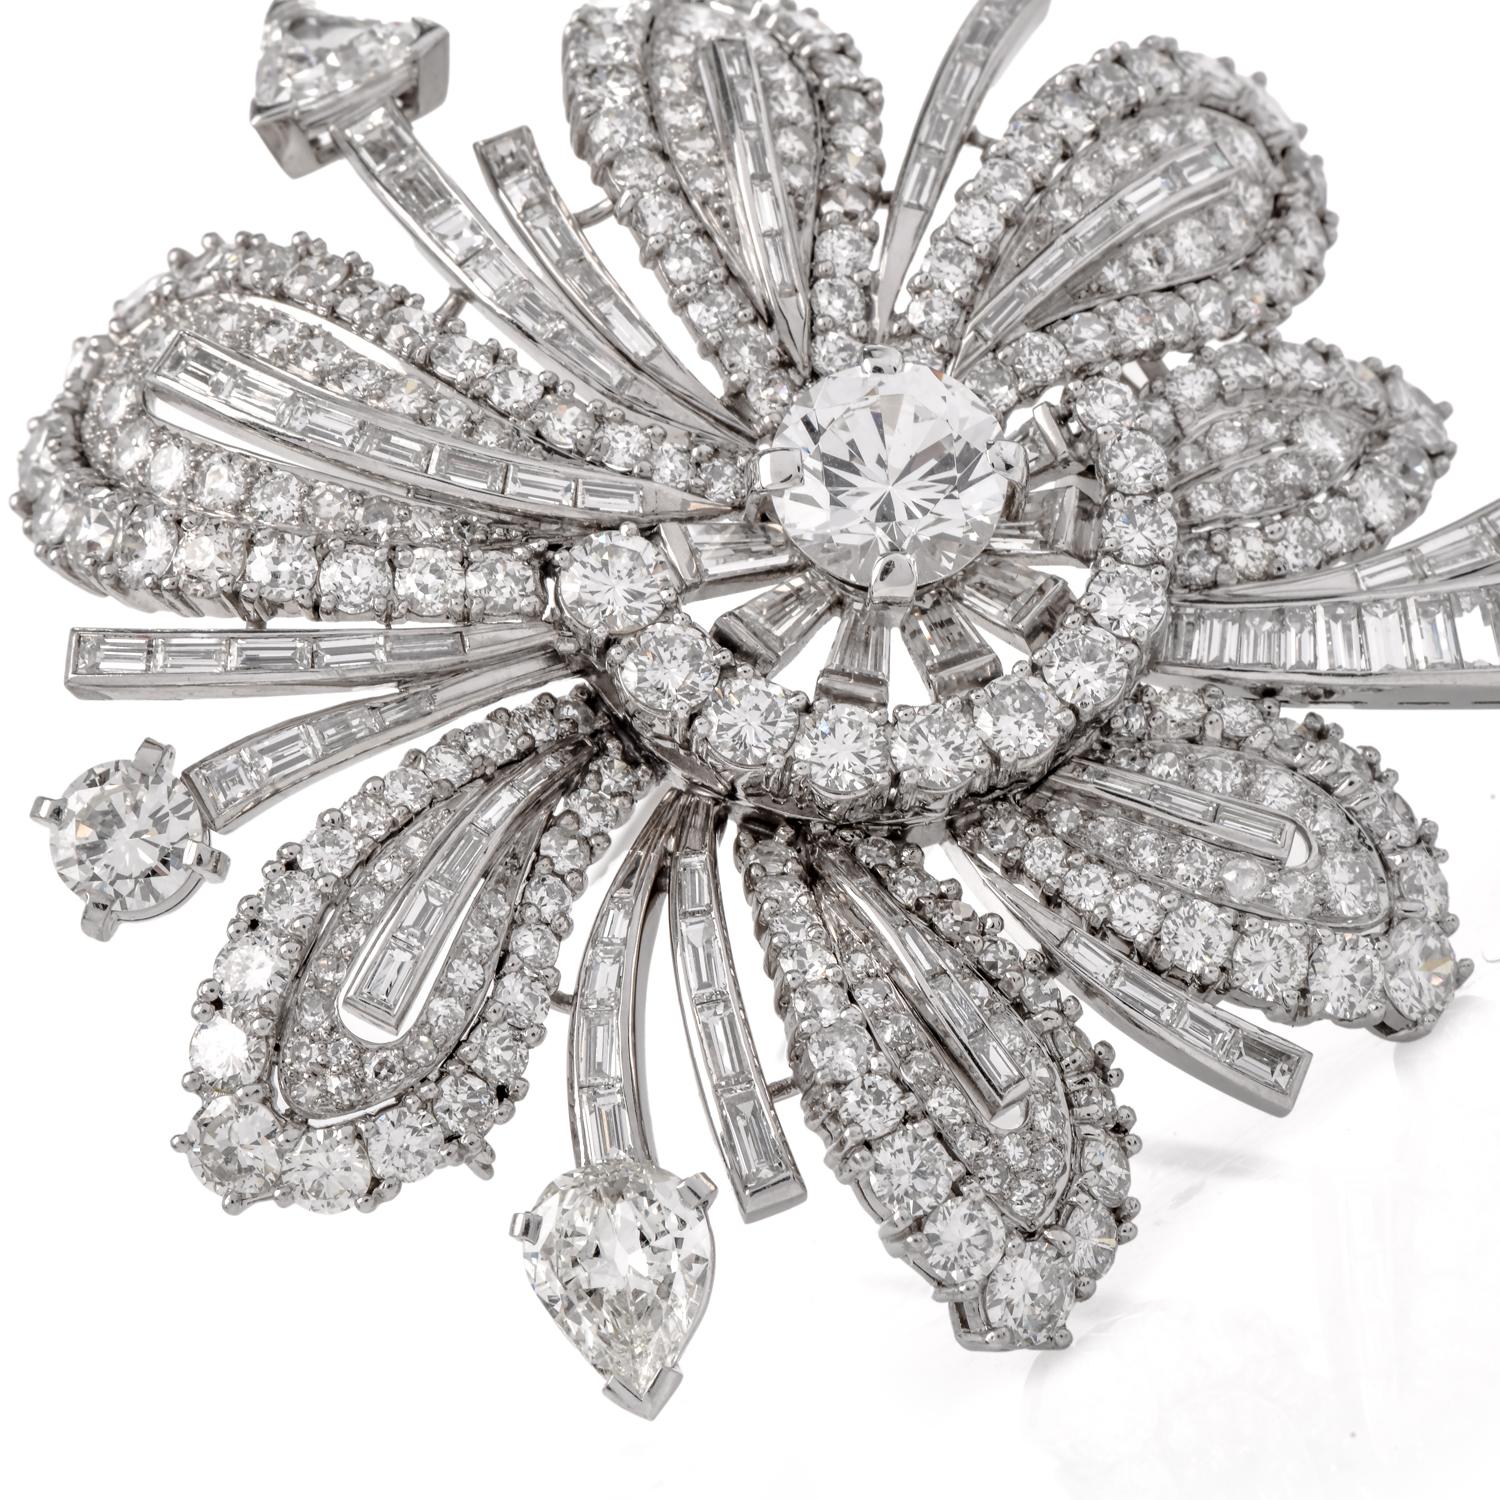 The splendor of nature's artistry with this luxurious, large floral brooch crafted in solid luxurious platinum.

This  fine vintage diamond Brooch Pin was inspired by a floral motif with winged movement and a beautiful flow, crafted in Luxurious